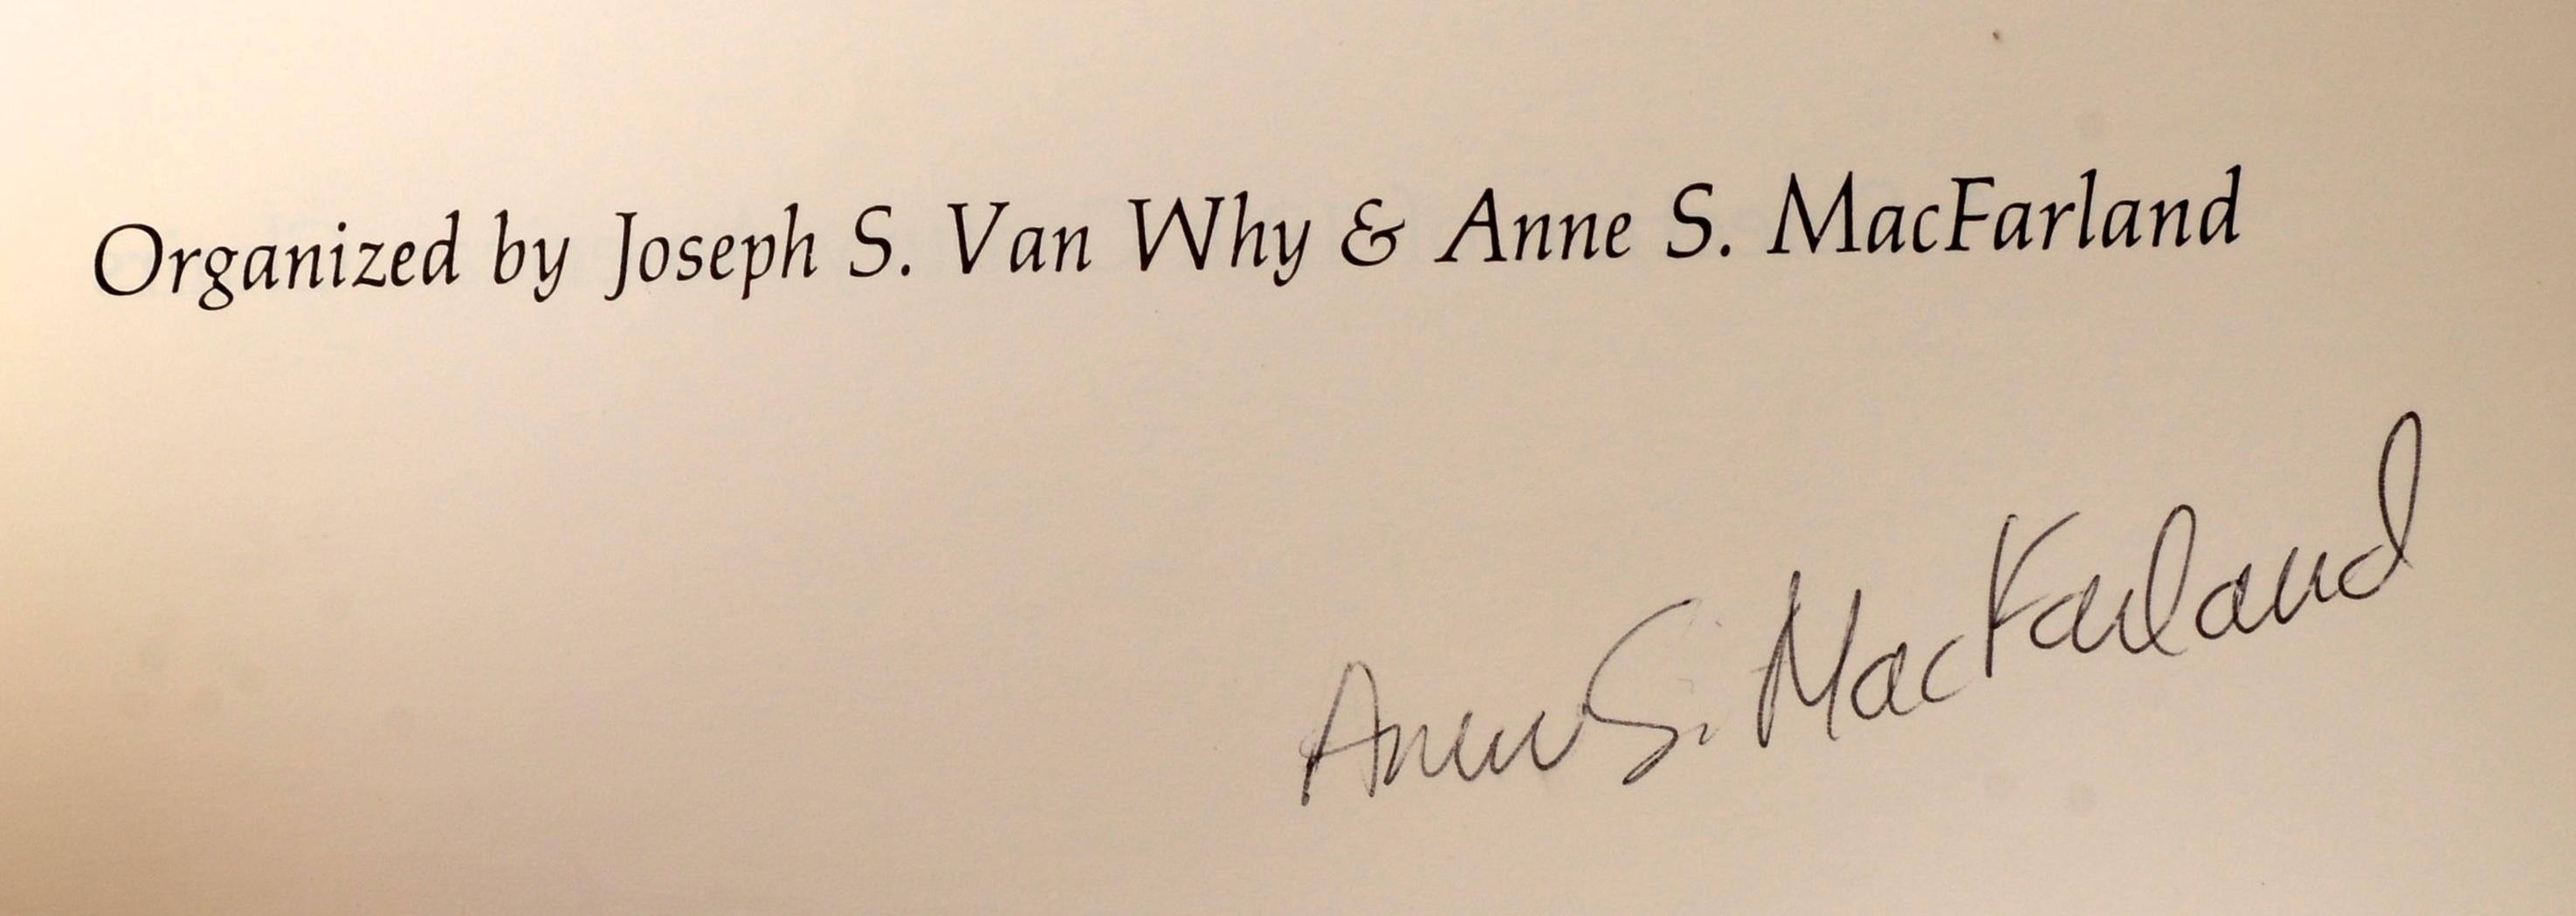 A Selection of 19th Century American Chairs by and Signed by Anne MacFarland. 1st Ed softcover Published by Stowe-Day Foundation (1973), Hartford, Connecticut, 1973. Introduction by Joseph S. Van Why; descriptive notes and commentary on each chair.